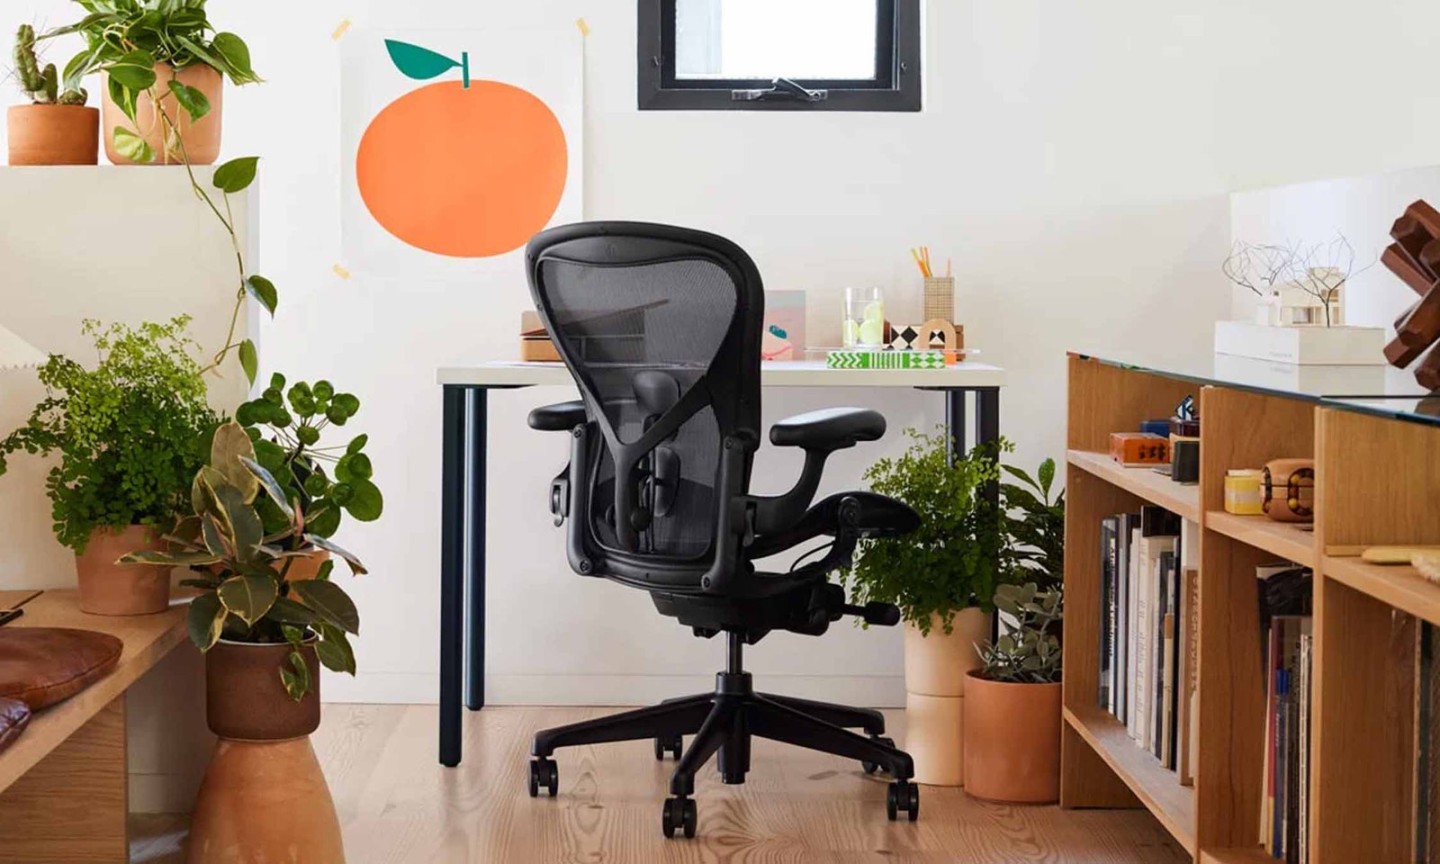 The best home office essentials for creating a stylish, relaxing